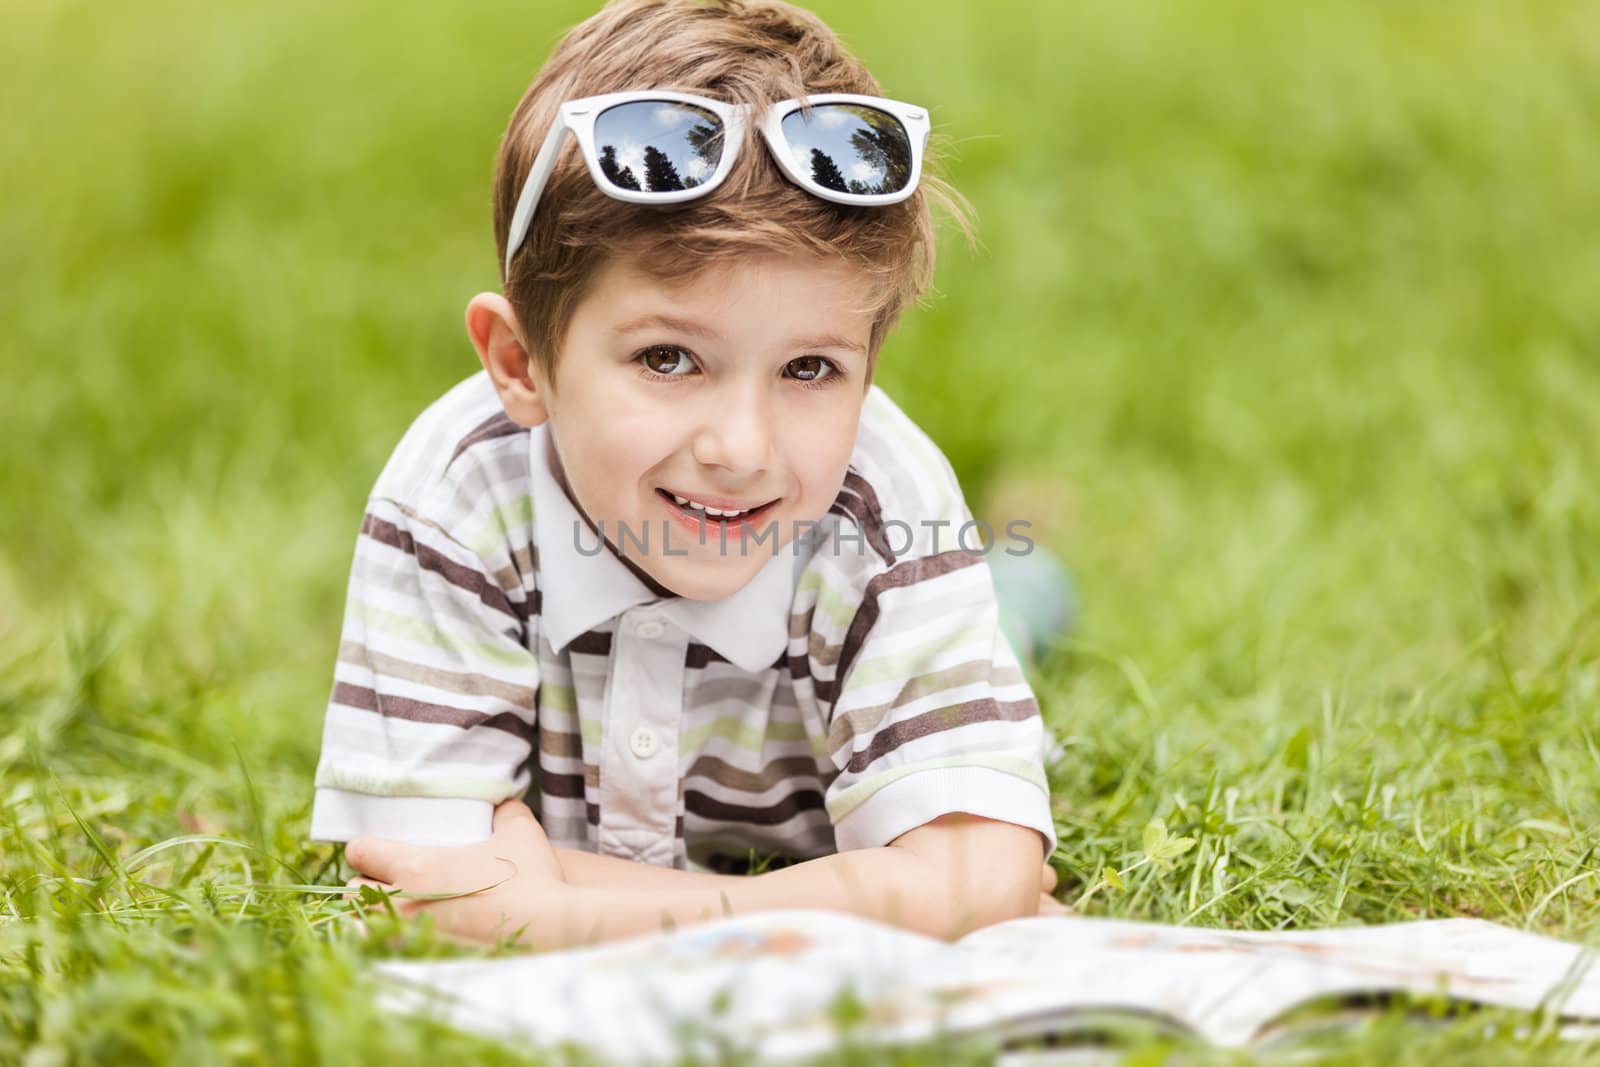 Beauty smiling child boy in sunglasses reading book outdoor on green grass field